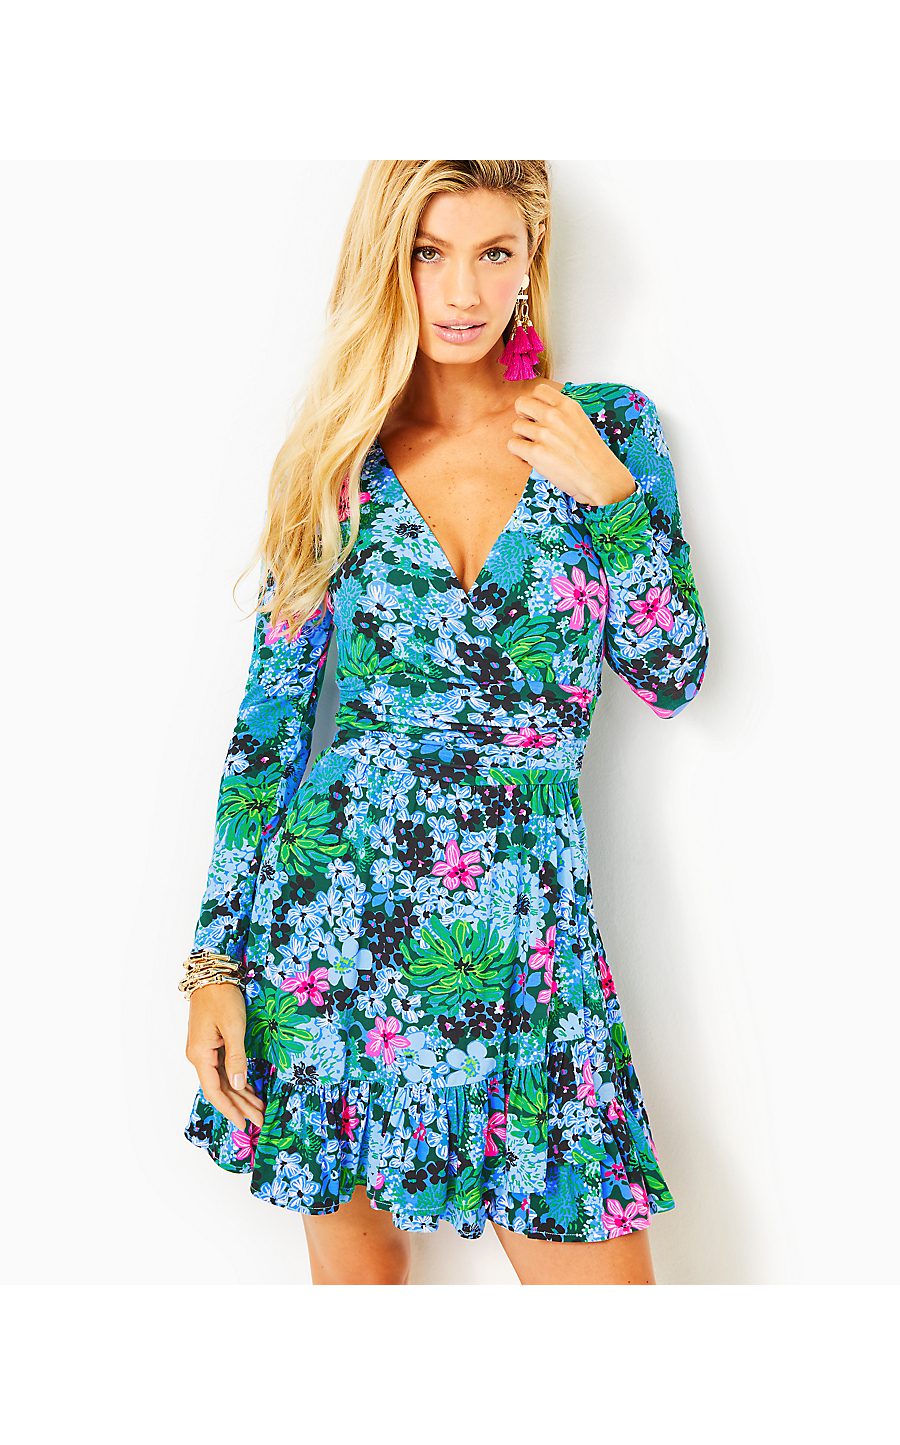 CODYLEE LONG-SLEEVE ROMPER - SOIREE ALL DAY - Lilly Pulitzer Store - Life's  a Beach